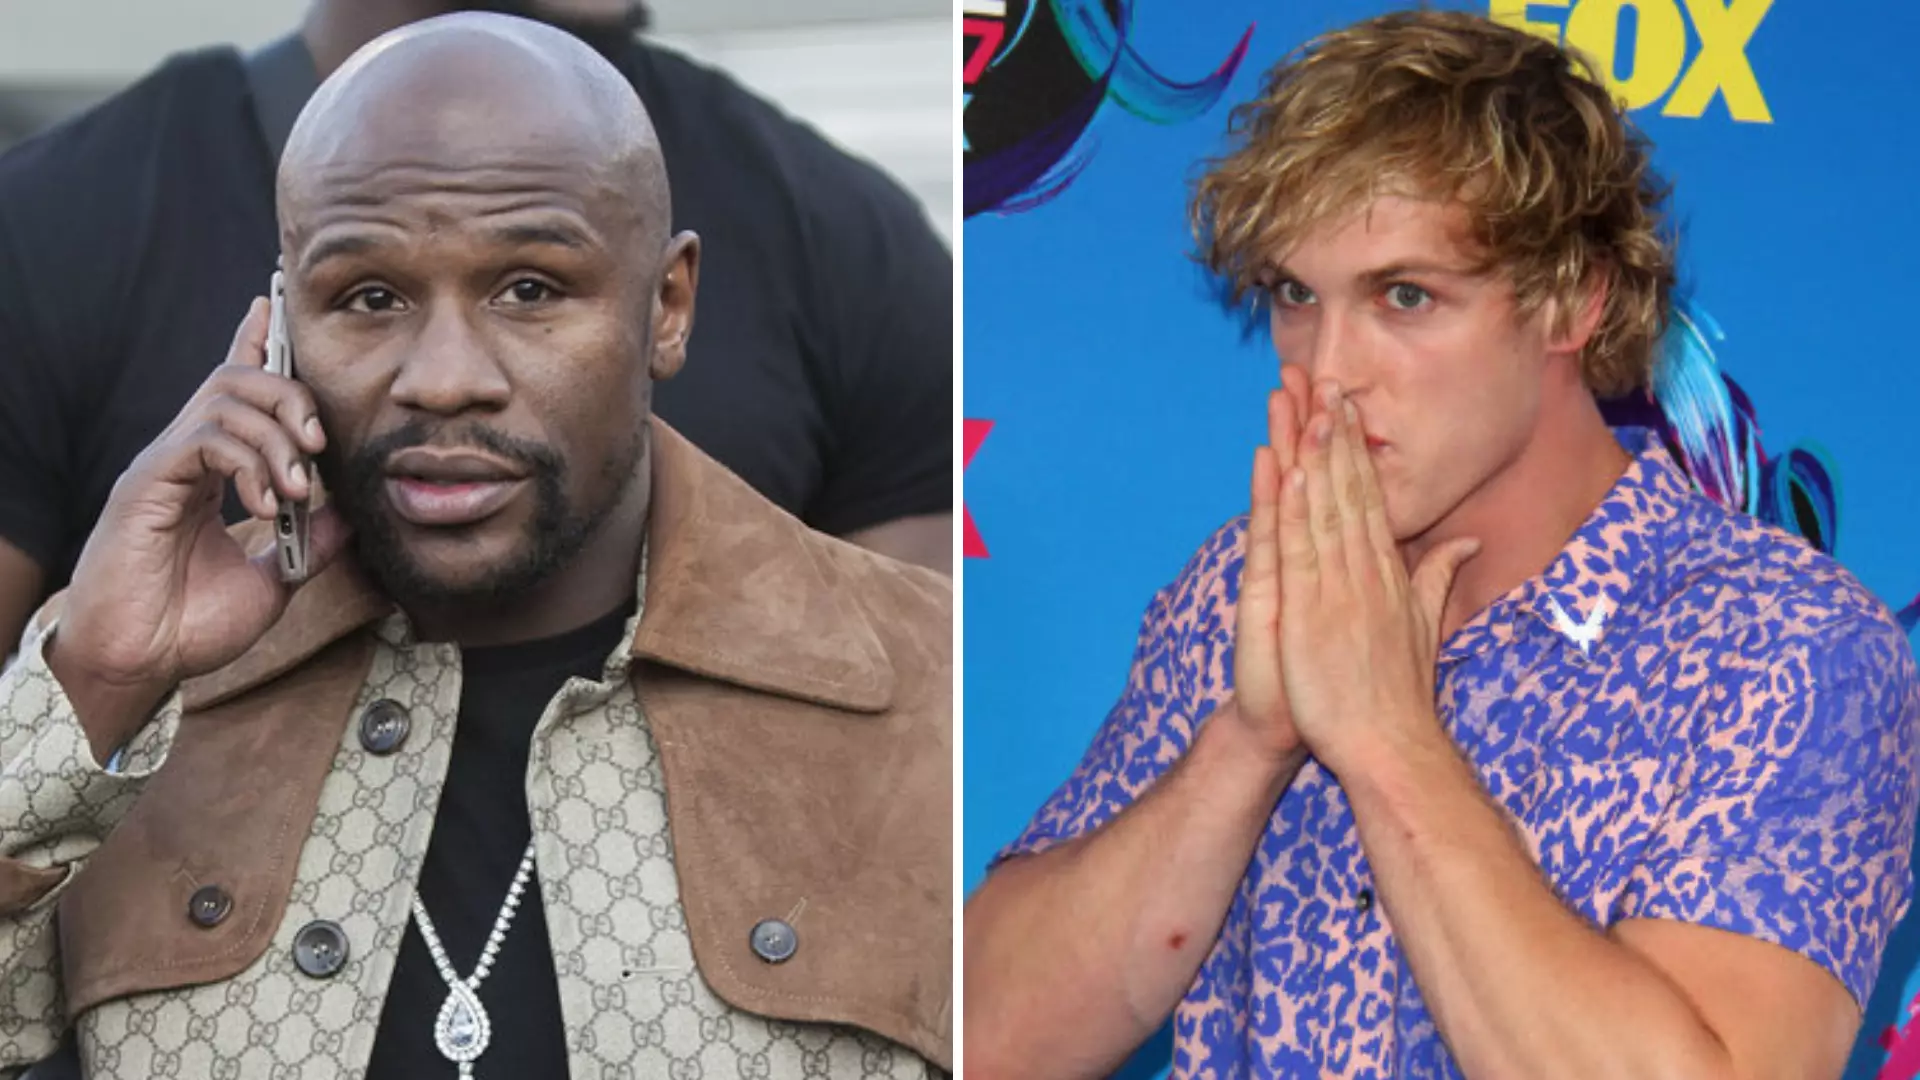 YouTuber Logan Paul Only Needs 'One Shot To Crush Floyd Mayweather,' Says Undefeated Boxer